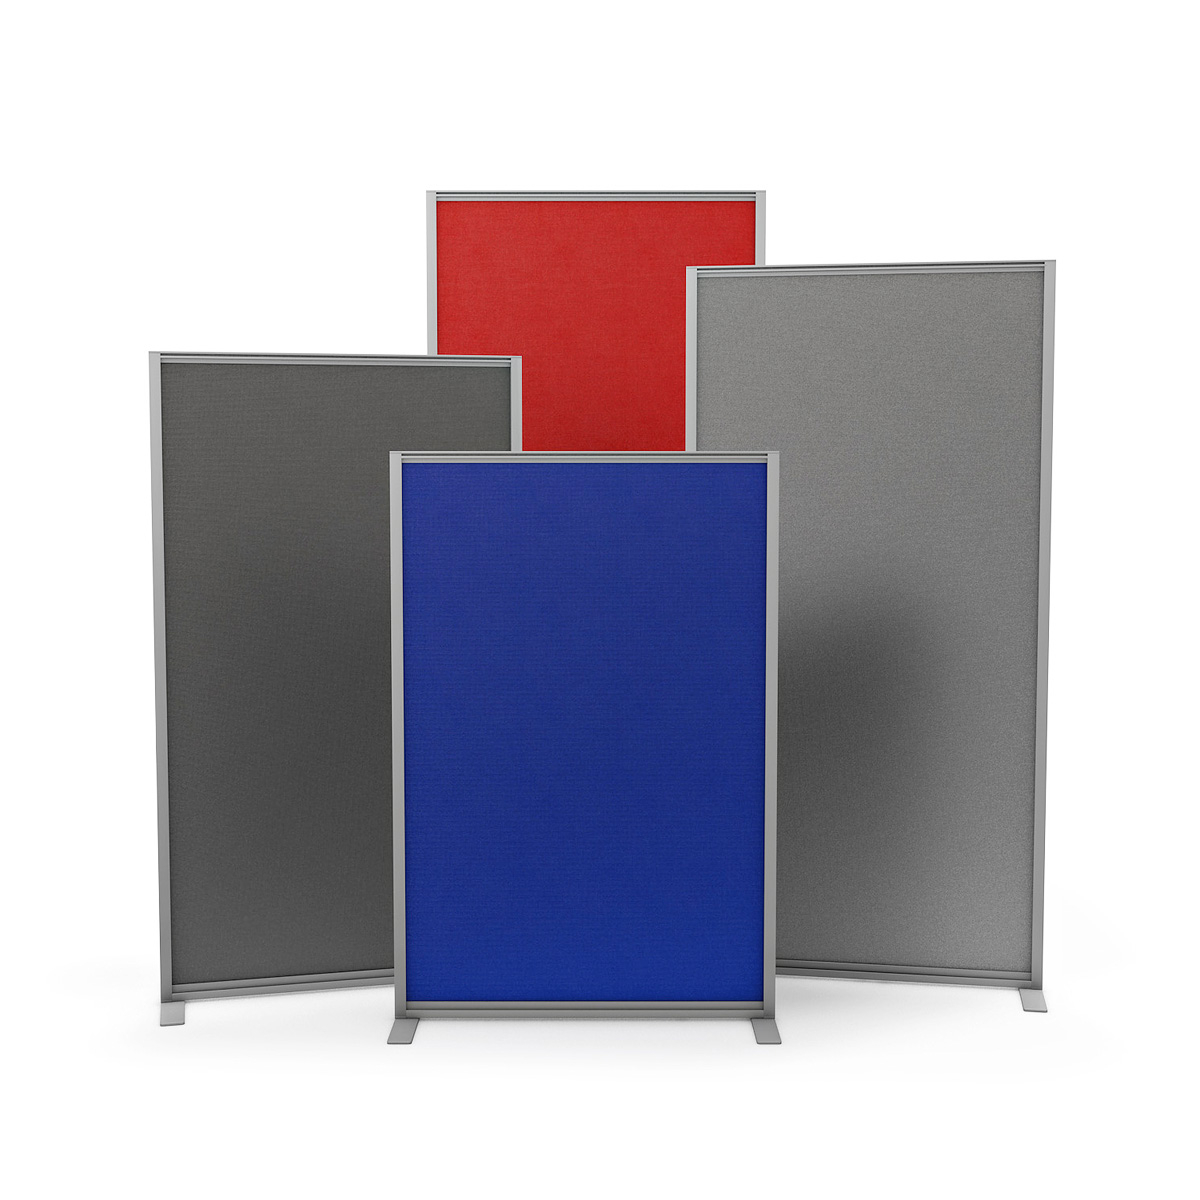 FRONTIER® Acoustic Panel Screens Freestanding - Choose From a Range of Sizes & Colour Options